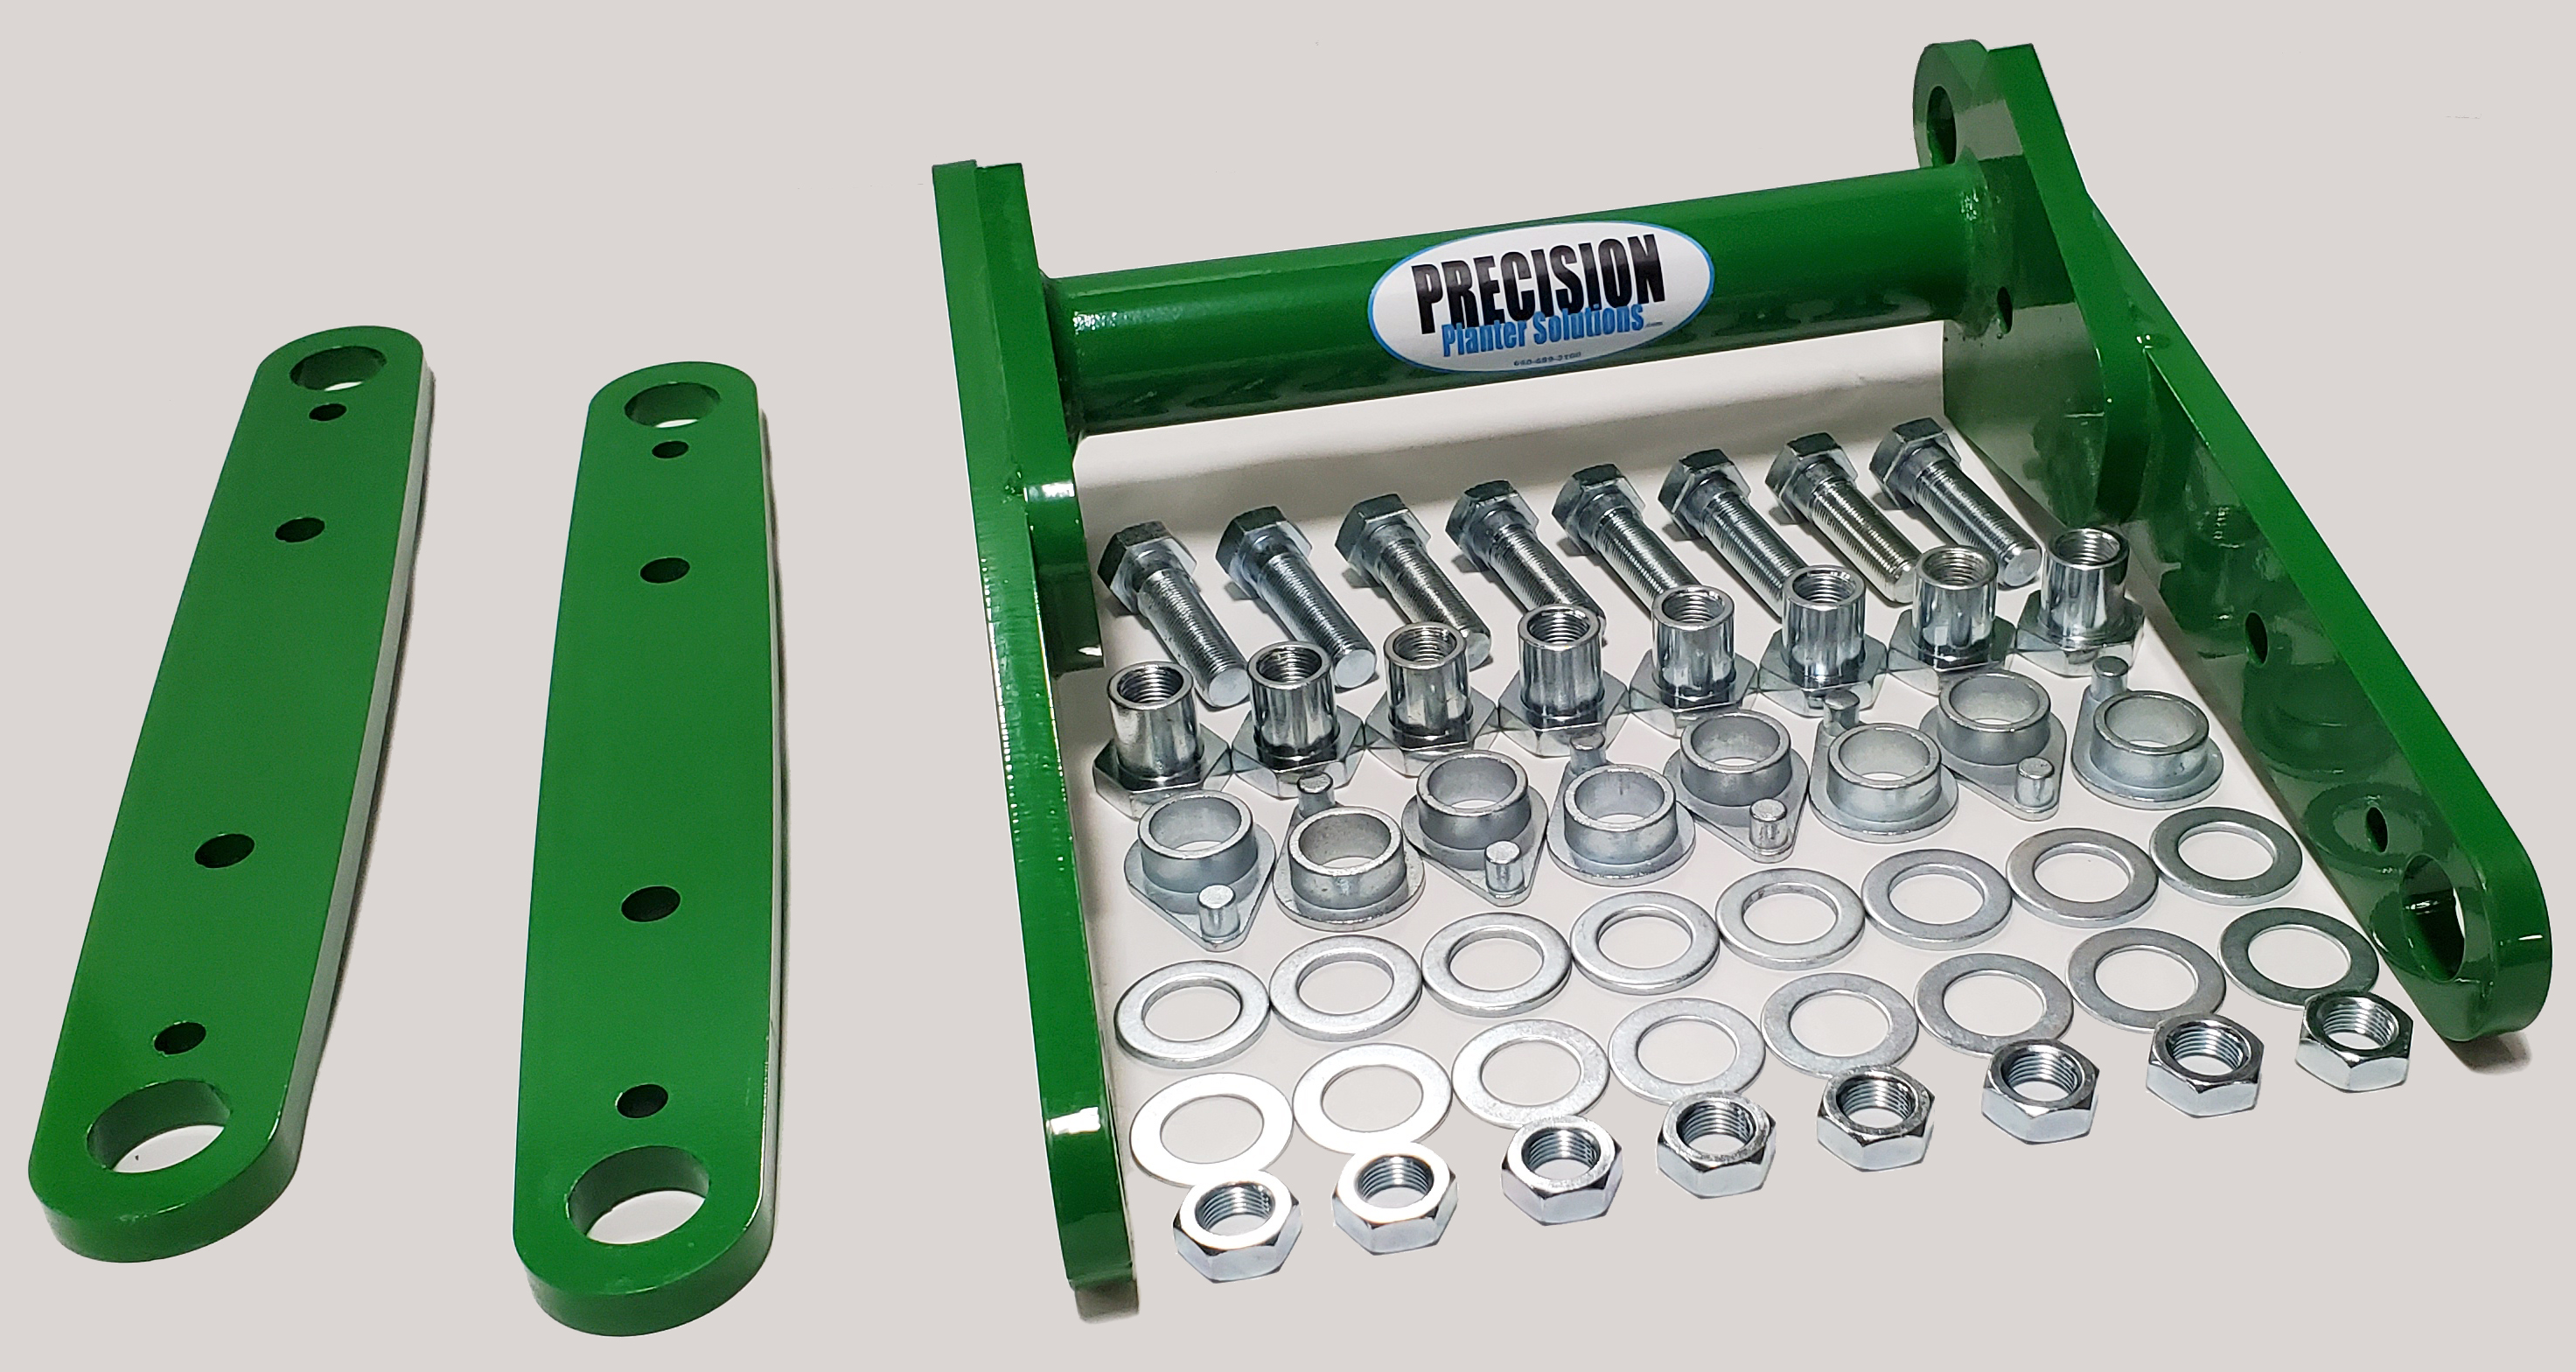 Partial Ream PPS Flange Bushing Kits with Ready-To-Install Parallel Arms